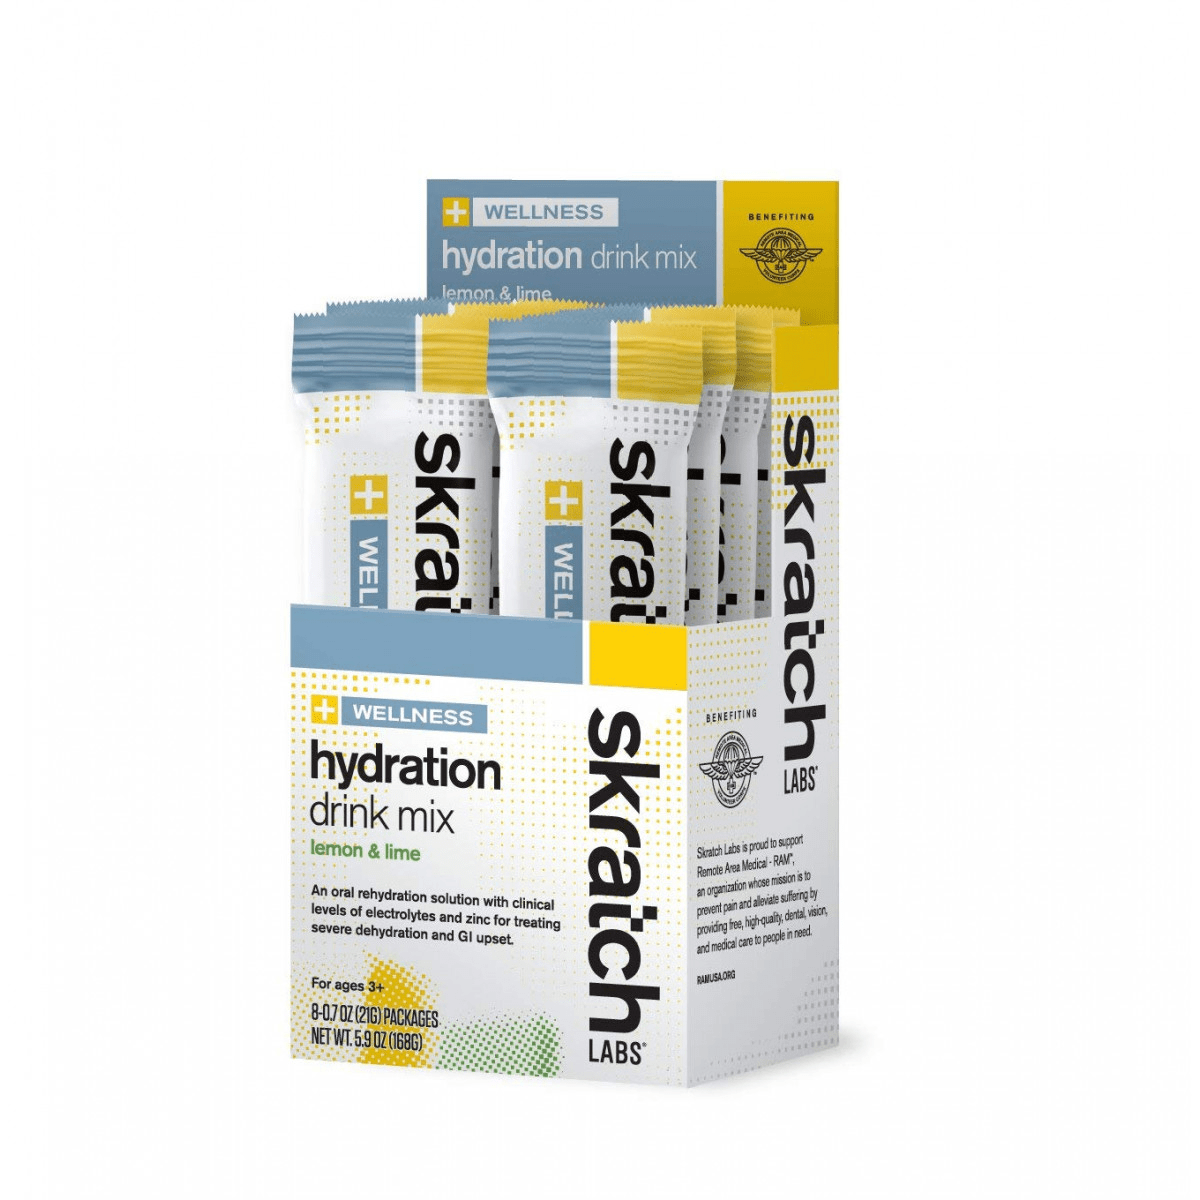 Skratch Labs Wellness Hydration Drink Mix Lemon & Lime Box of 8 Other - Nutrition - Drink Mixes